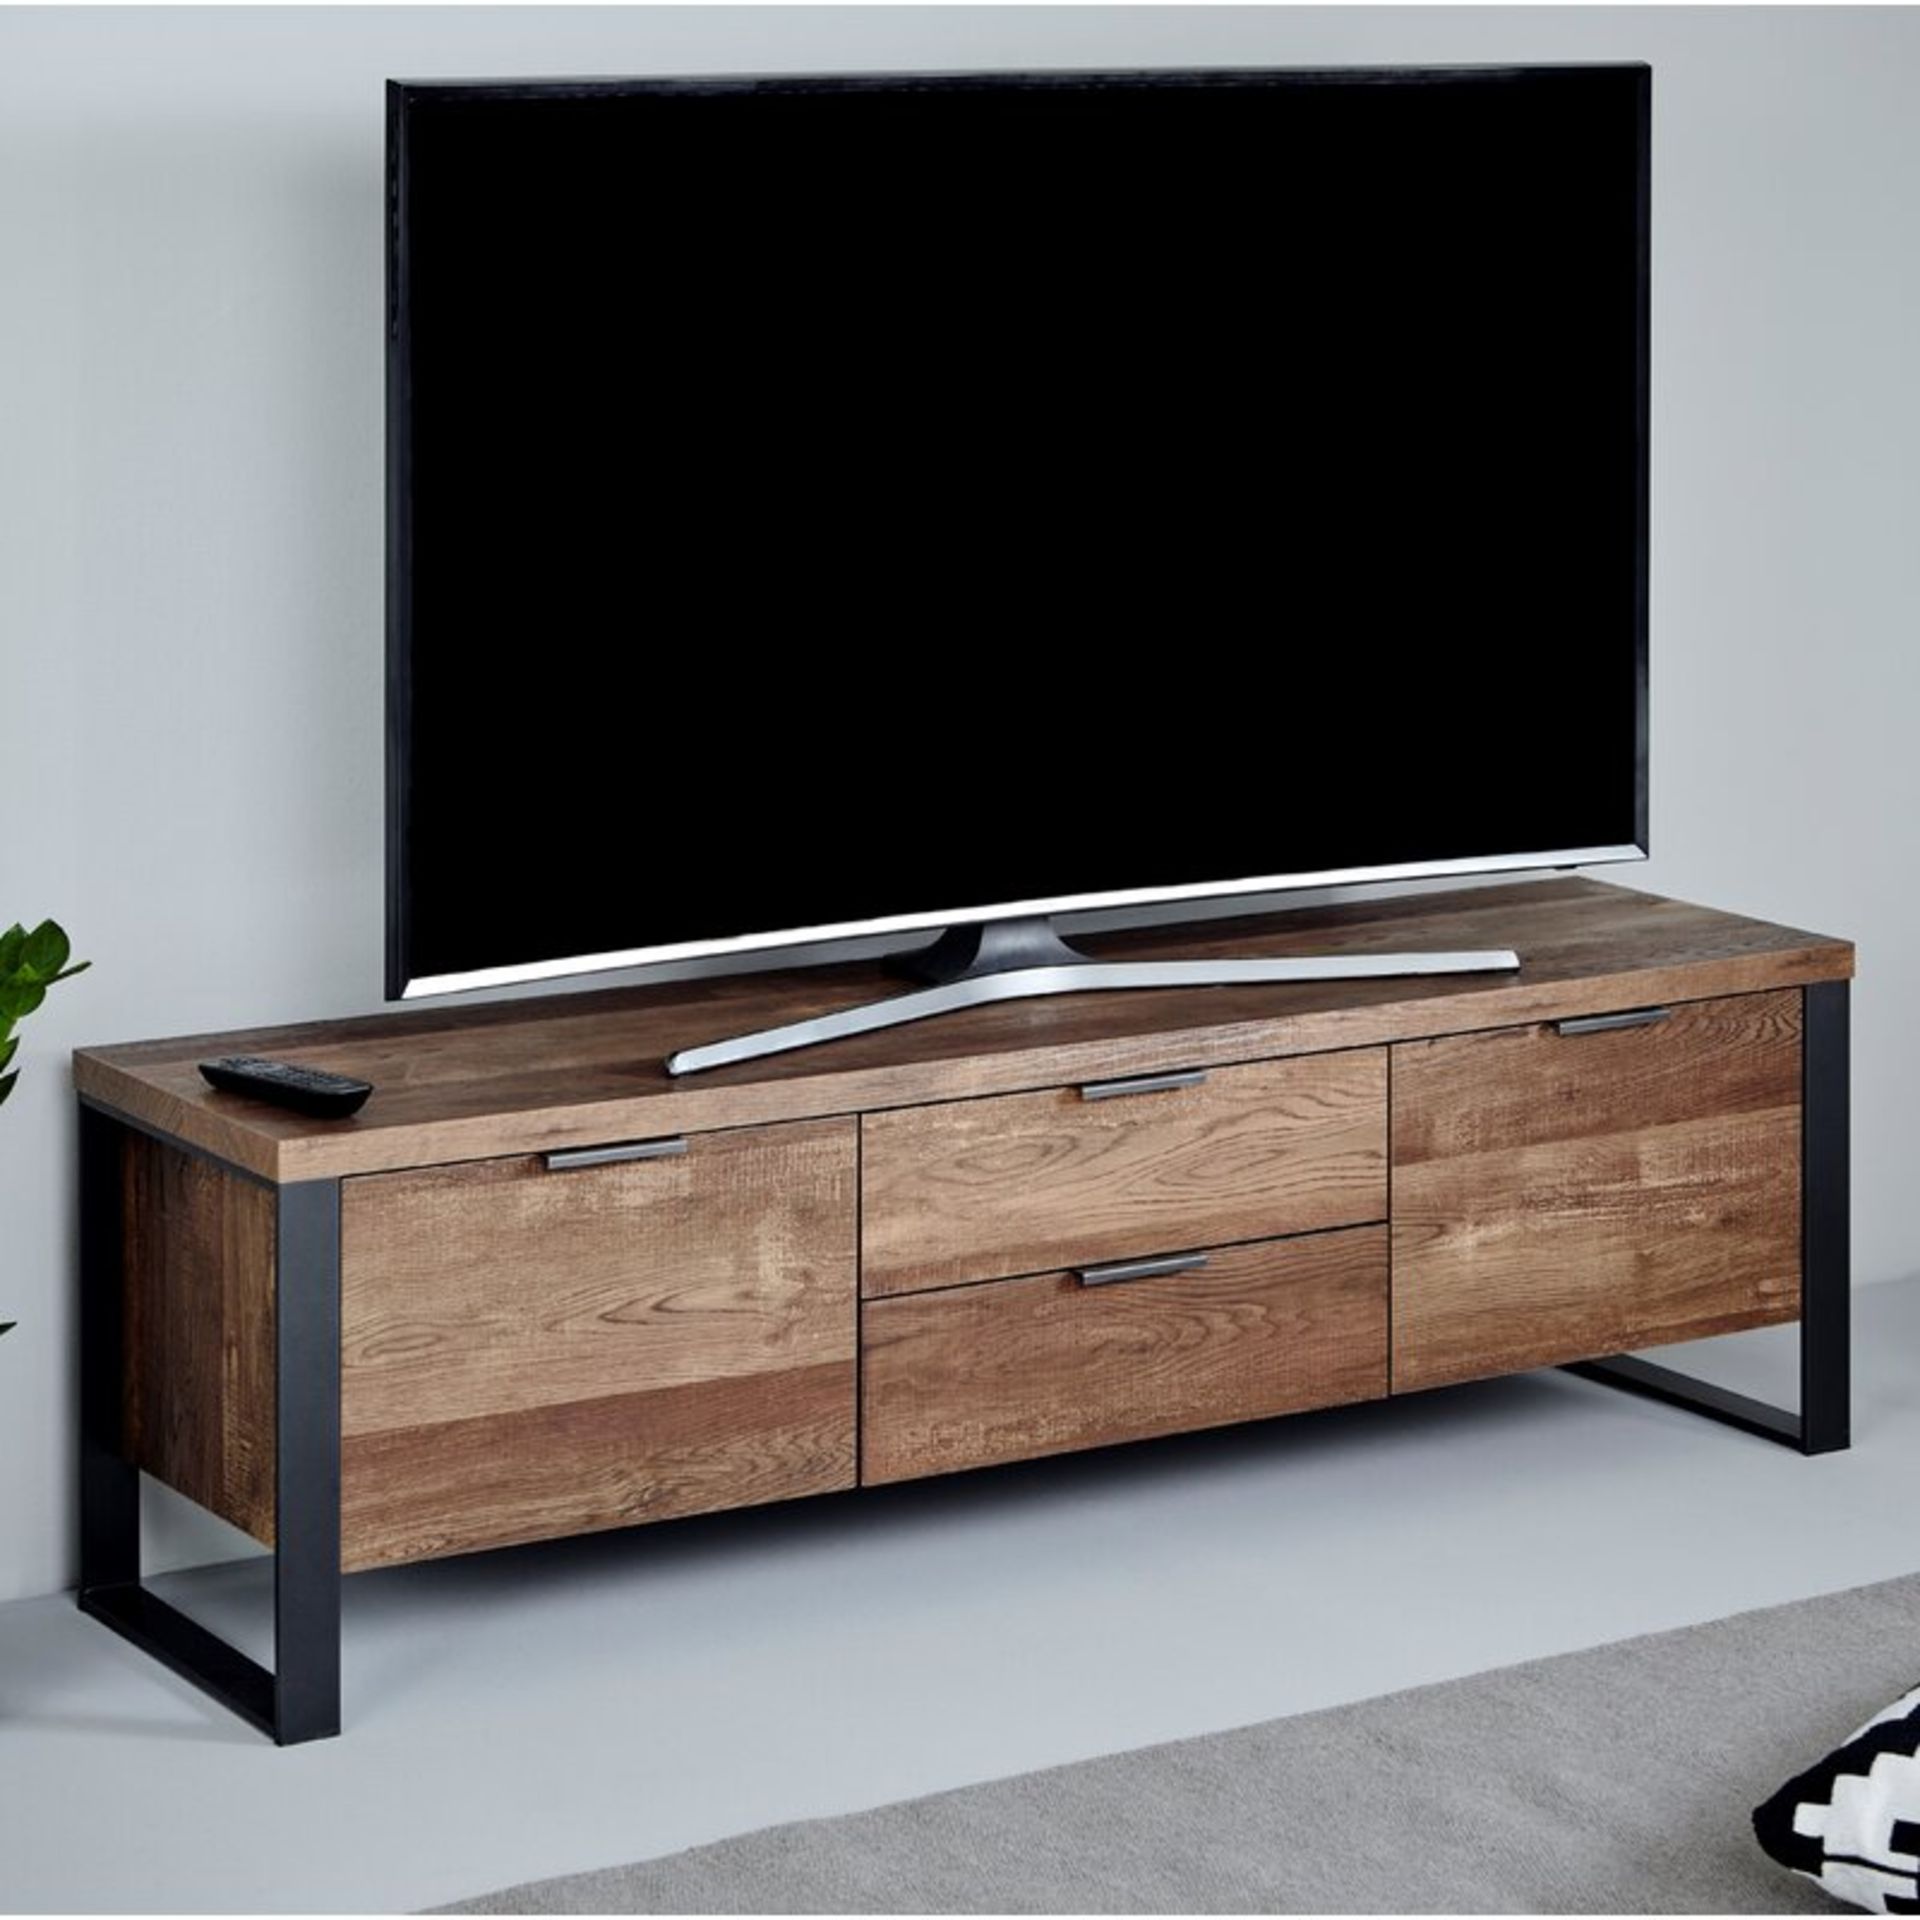 Loop TV Stand for TVs up to 65" RRP £274.99